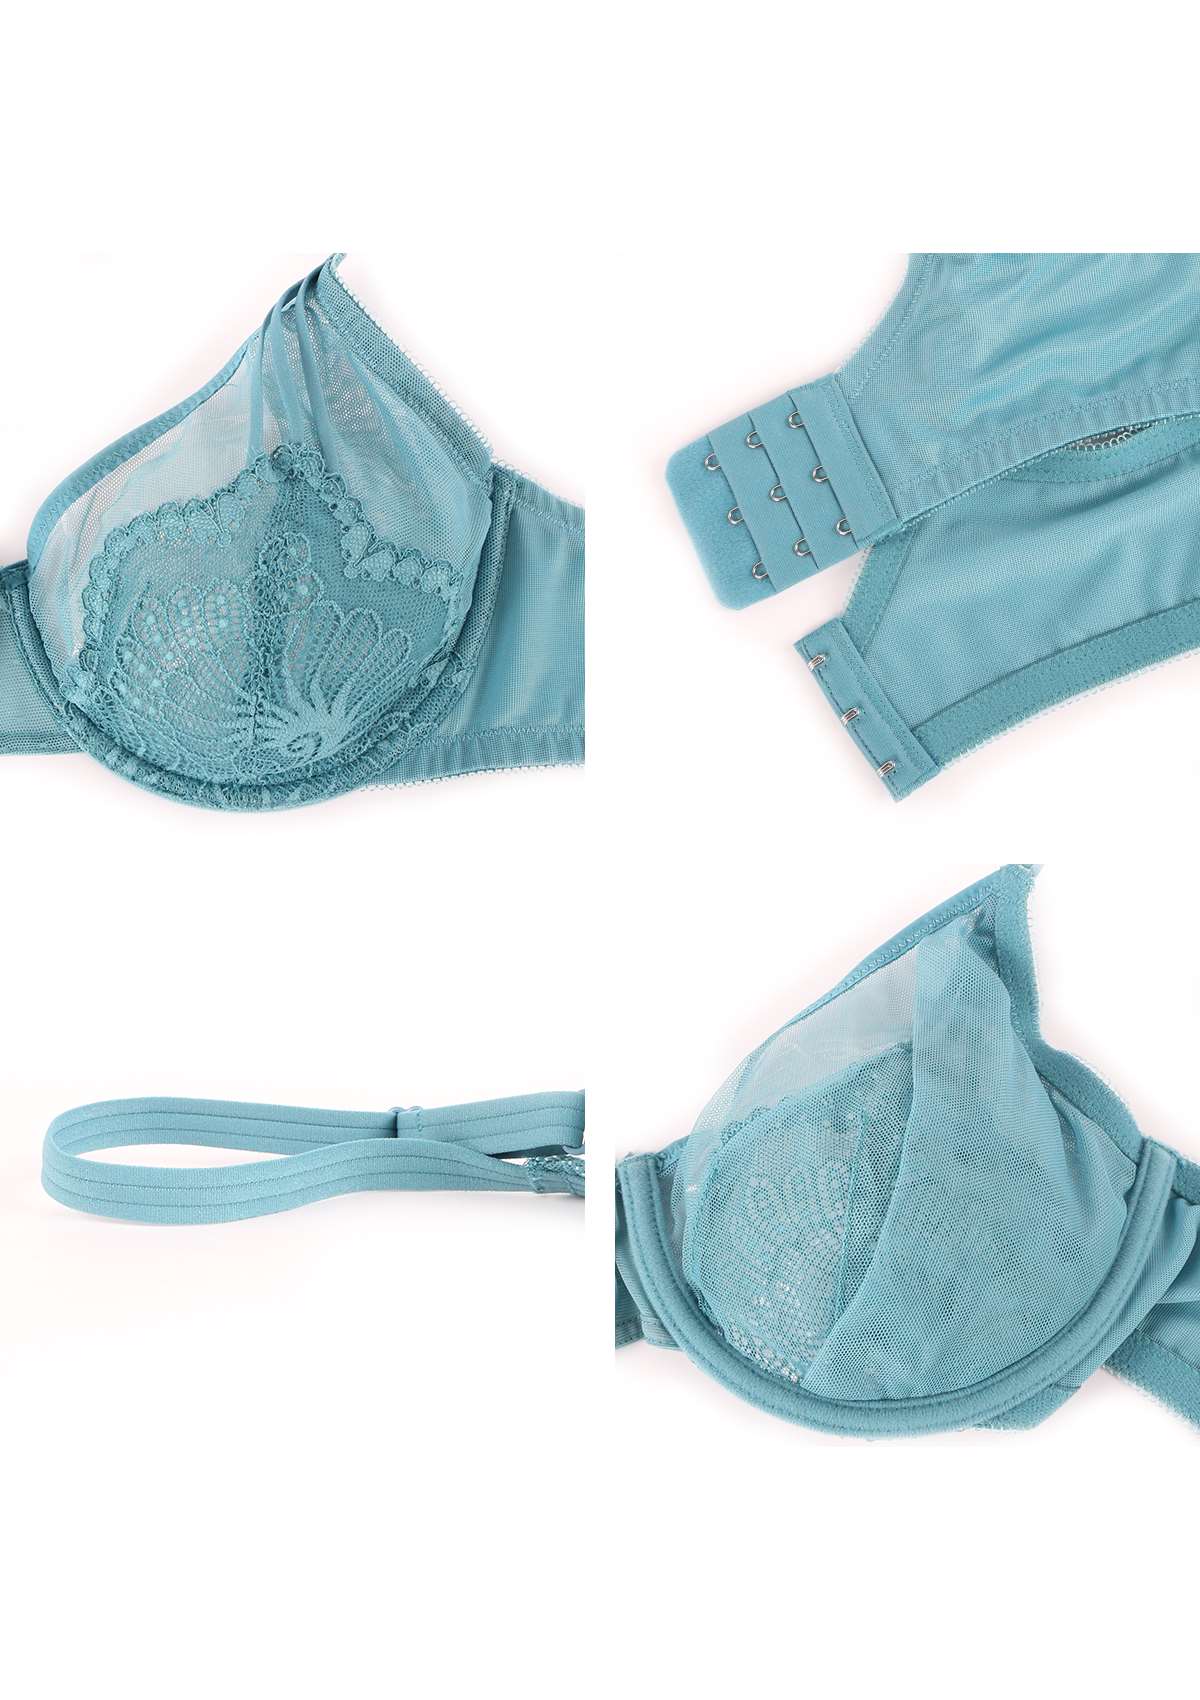 HSIA Sexy Floral Lace Minimizer Bra - Crystal Blue / 36 / D